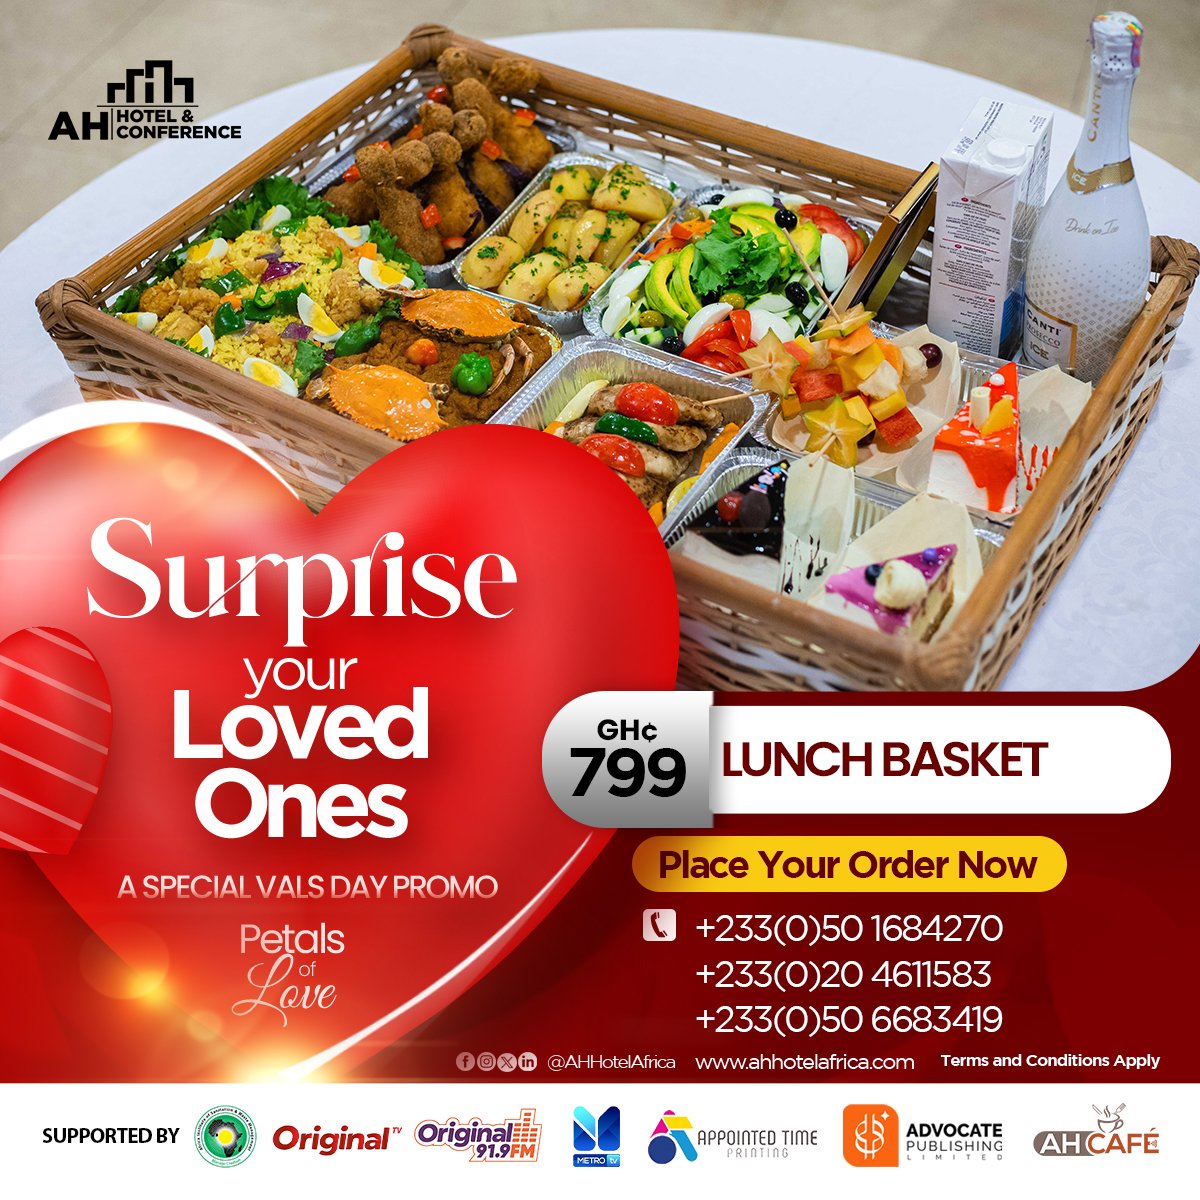 Surprise your loved ones this Valentine's Day with our exclusive promo. Place Your Order Now: +233(0)50 1684270 +233(0)20 4611583 +233(0)50 6683419 #ValentinesDay #PetalsOfLove #AHCelebrates #AfrocentricHospitality #AHHotel